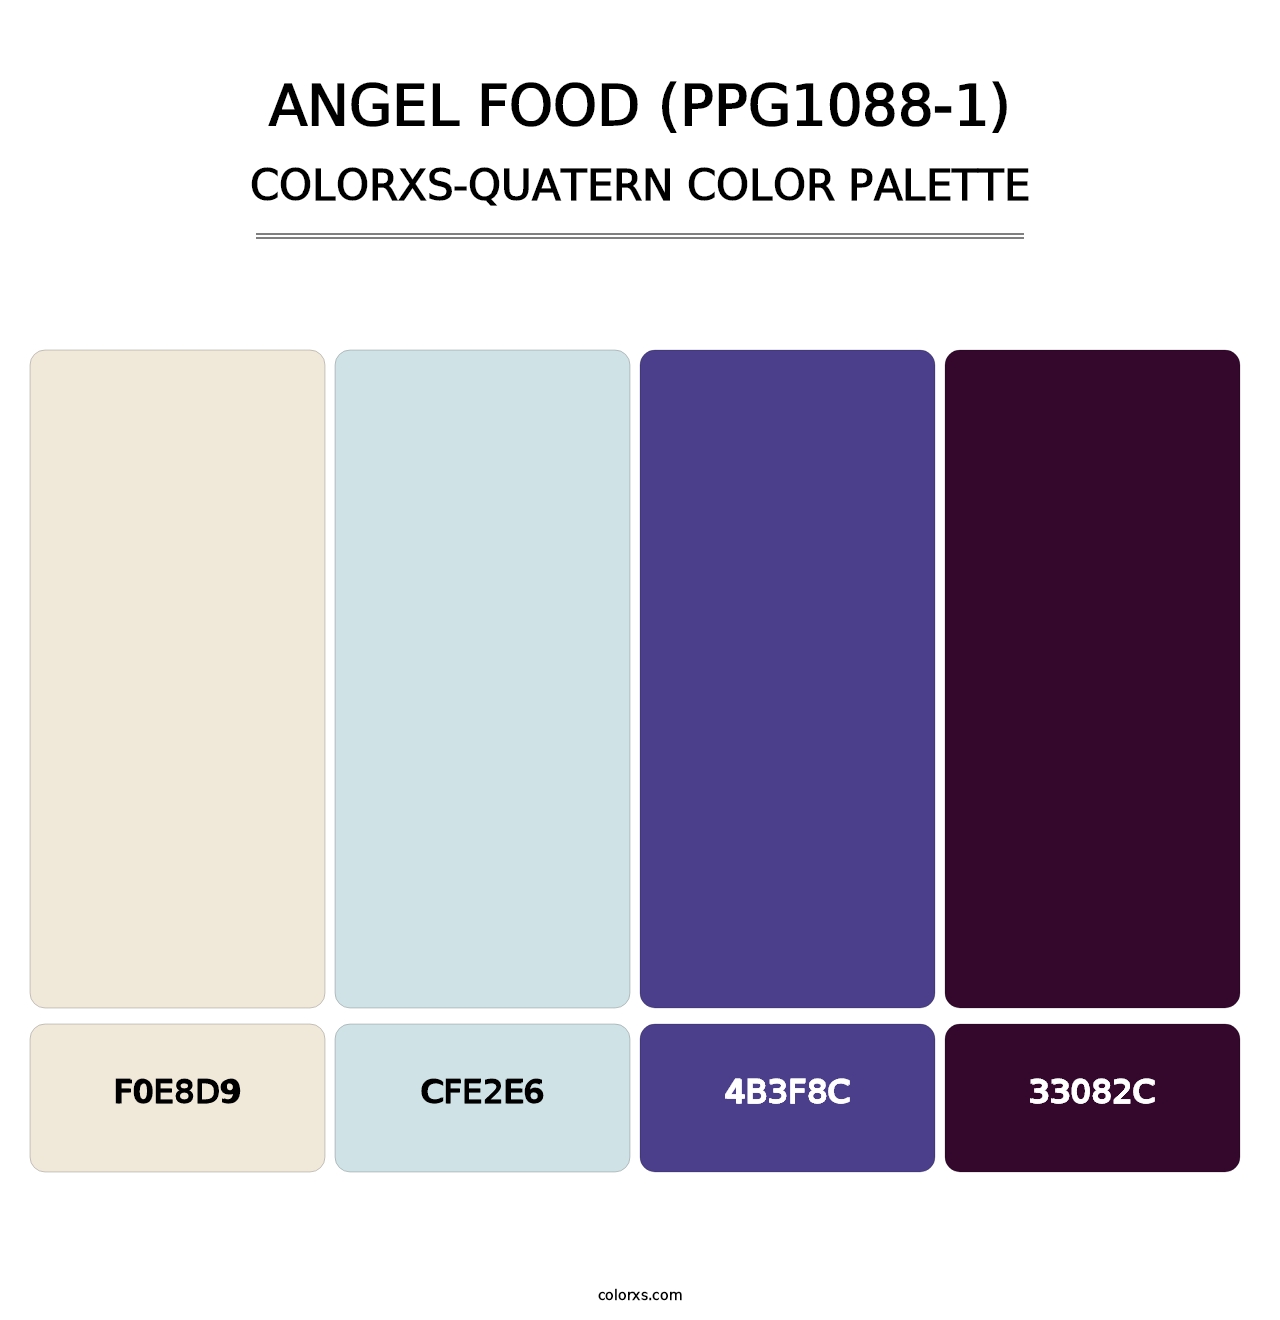 Angel Food (PPG1088-1) - Colorxs Quatern Palette